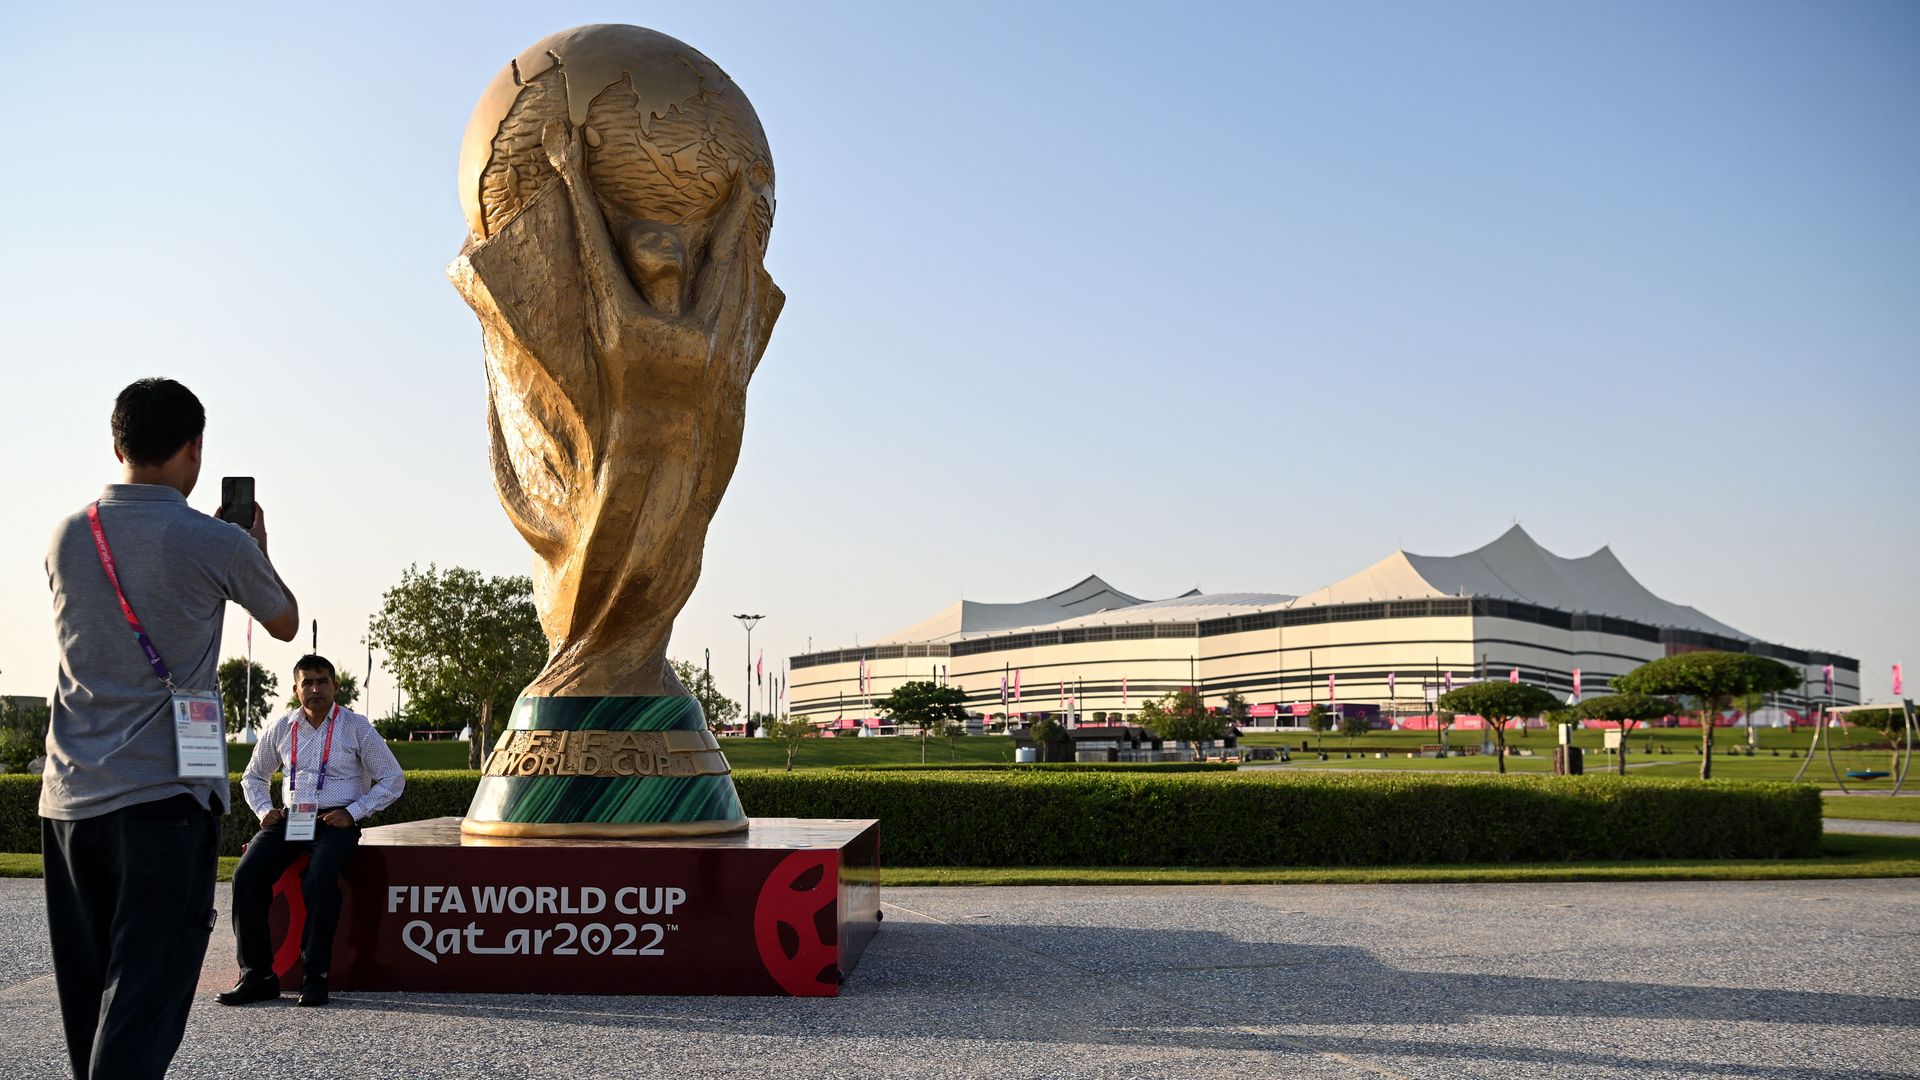 A man takes a picture of a FIFA World Cup trophy replica in front of the Al-Bayt Stadium in al-Khor on November 10, 2022, ahead of the Qatar 2022 FIFA World Cup football tournament